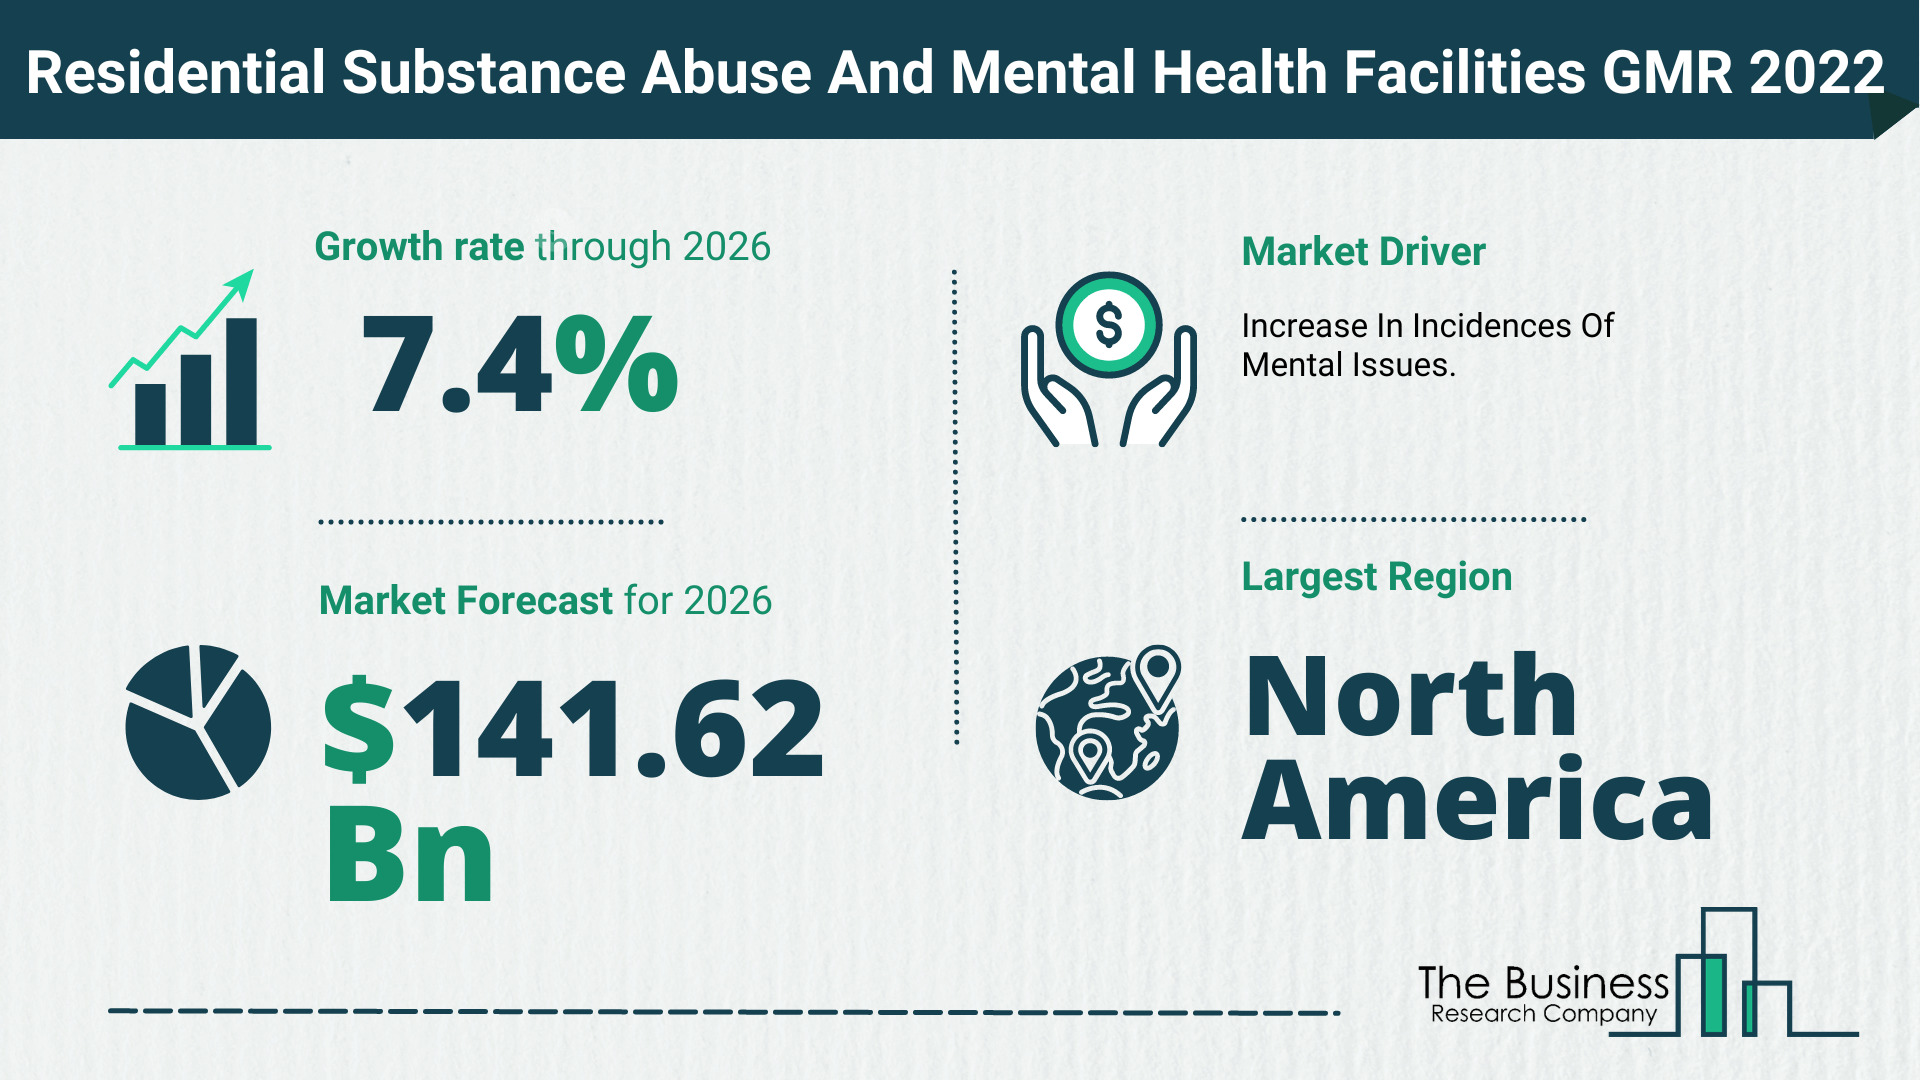 Global Residential Substance Abuse And Mental Health Facilities Market